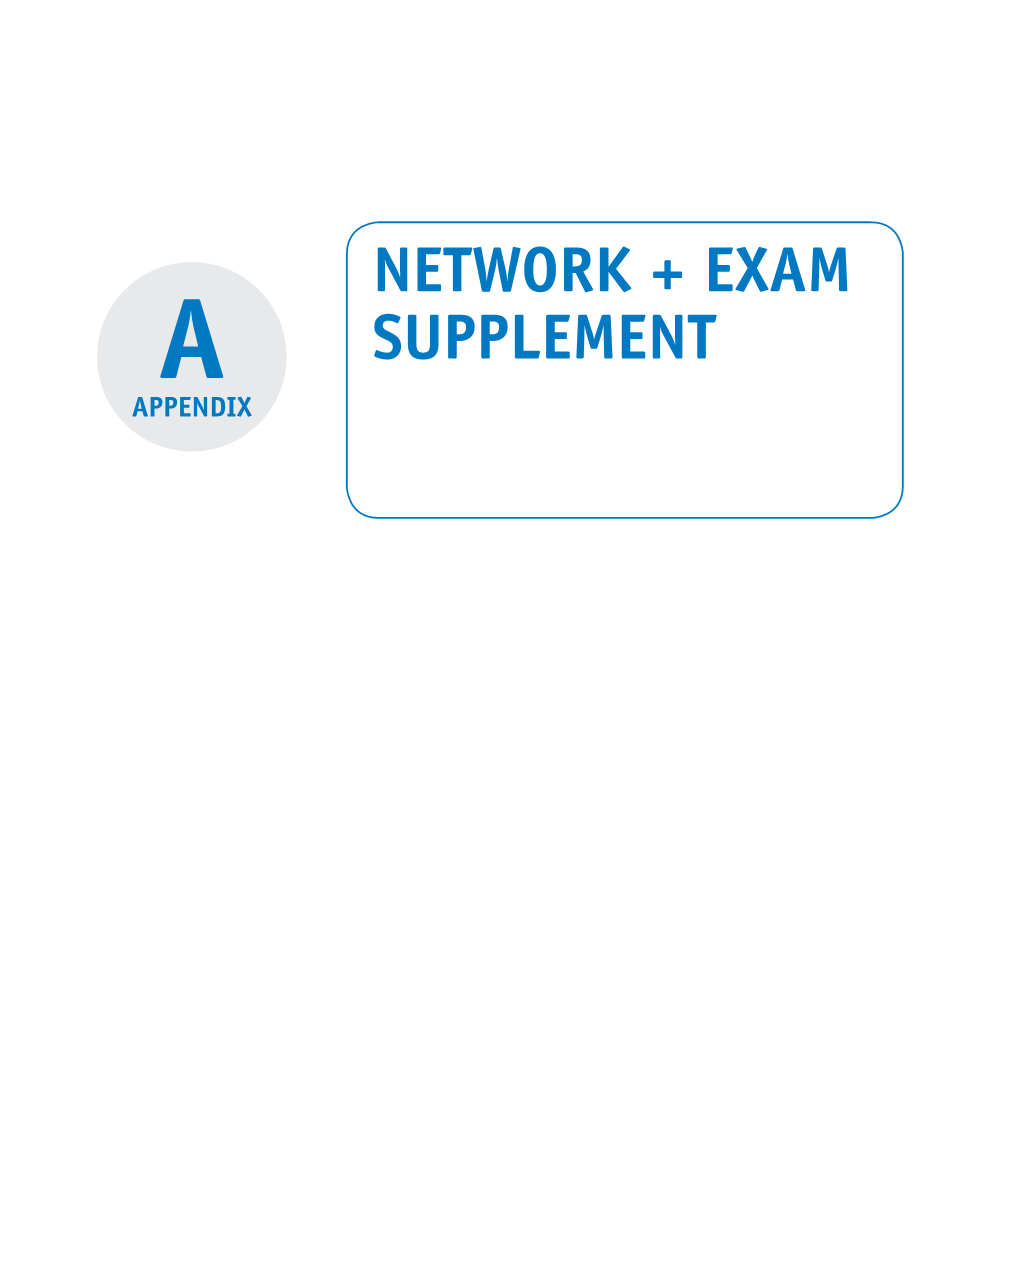 NETWORK + EXAM SUPPLEMENT Information, Which Is Sent to the Proxy